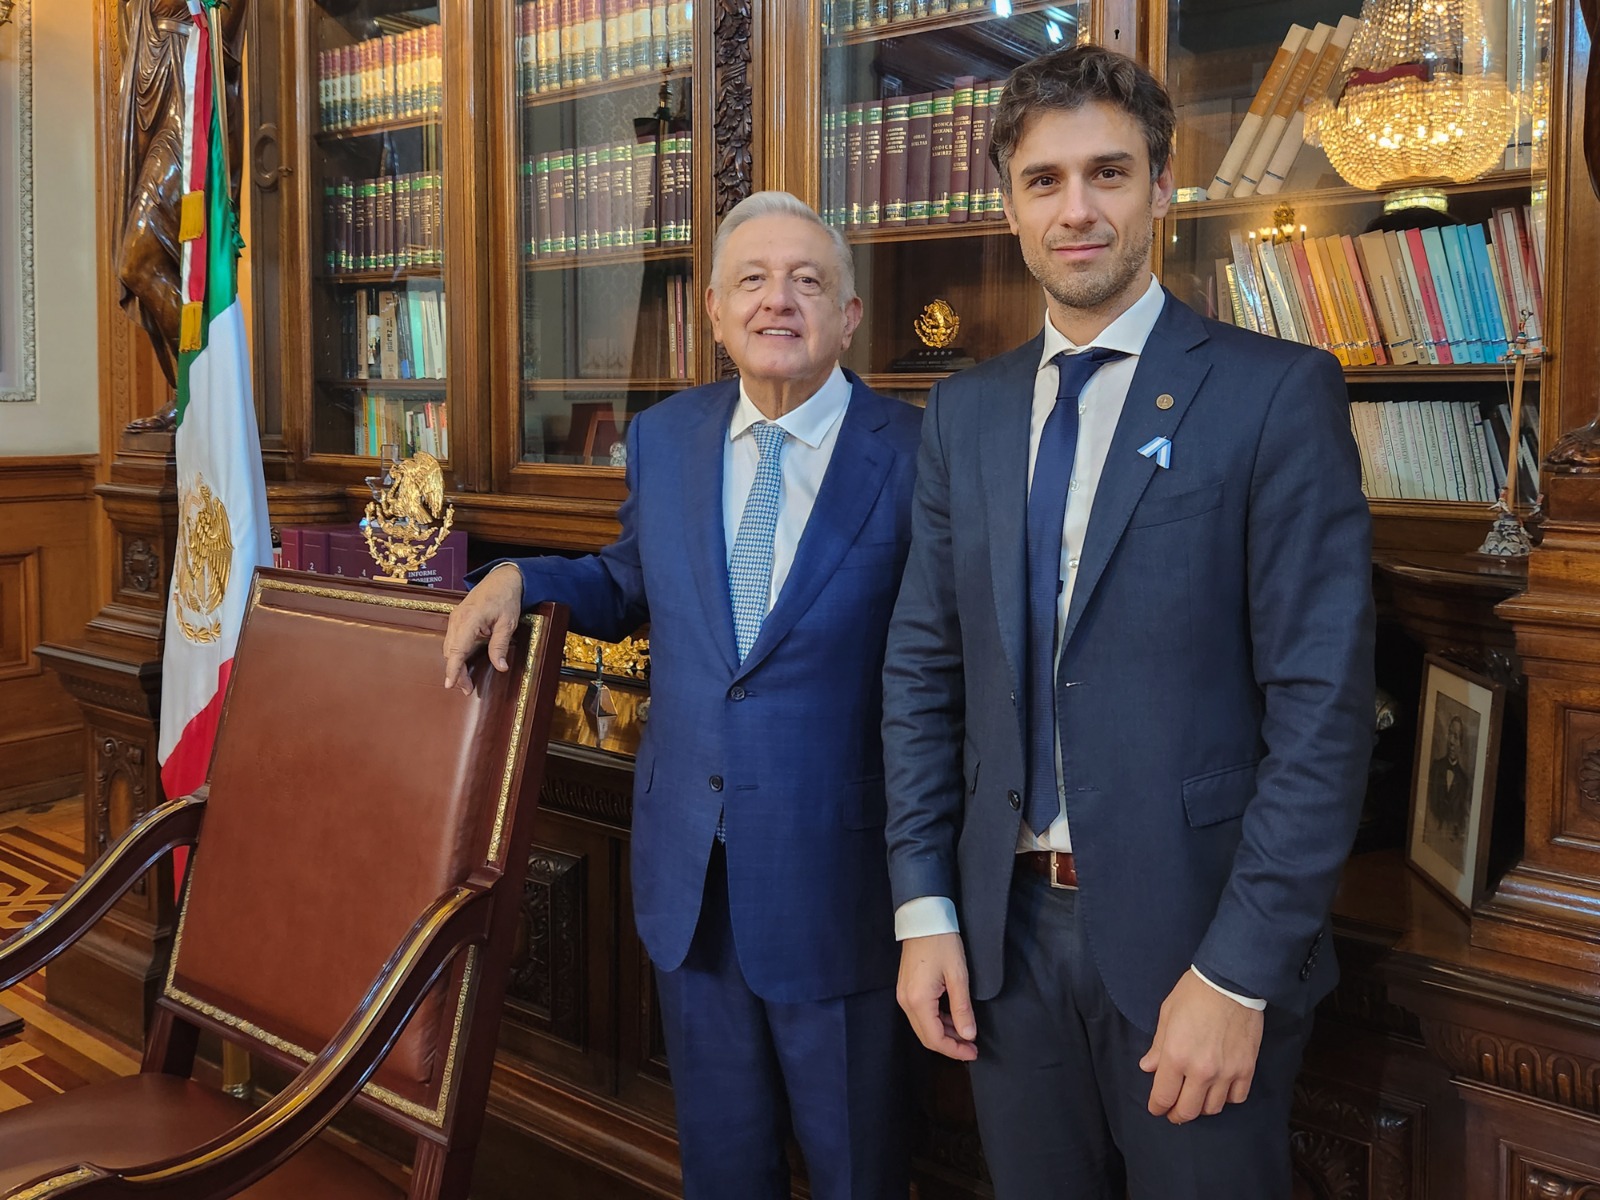 The President of Mexico held a meeting with the lawyer of former president Pedro Castillo